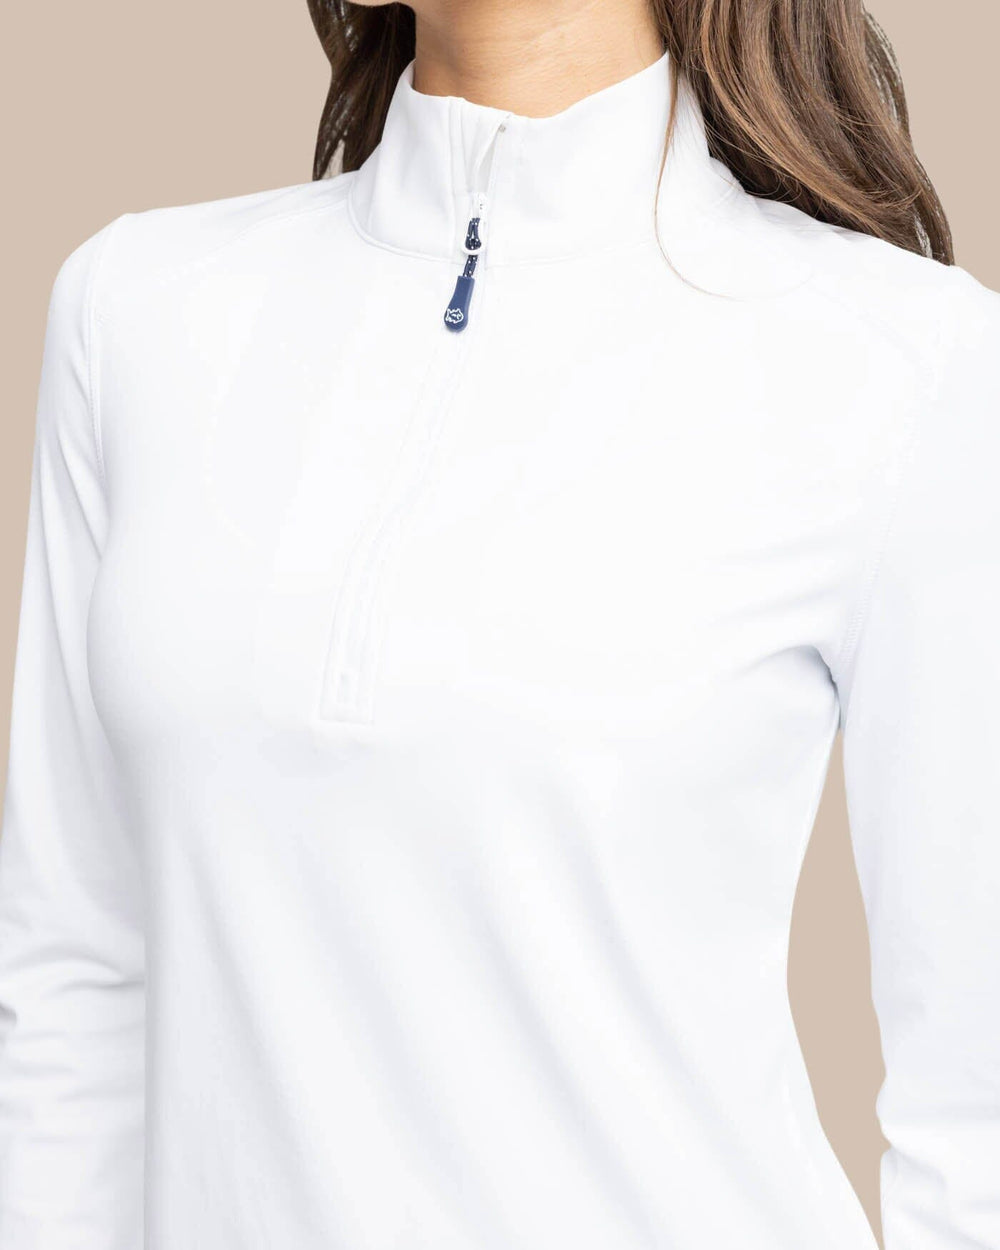 The detail view of the Southern Tide Runaround Quarter Zip Pull Over by Southern Tide - Classic White